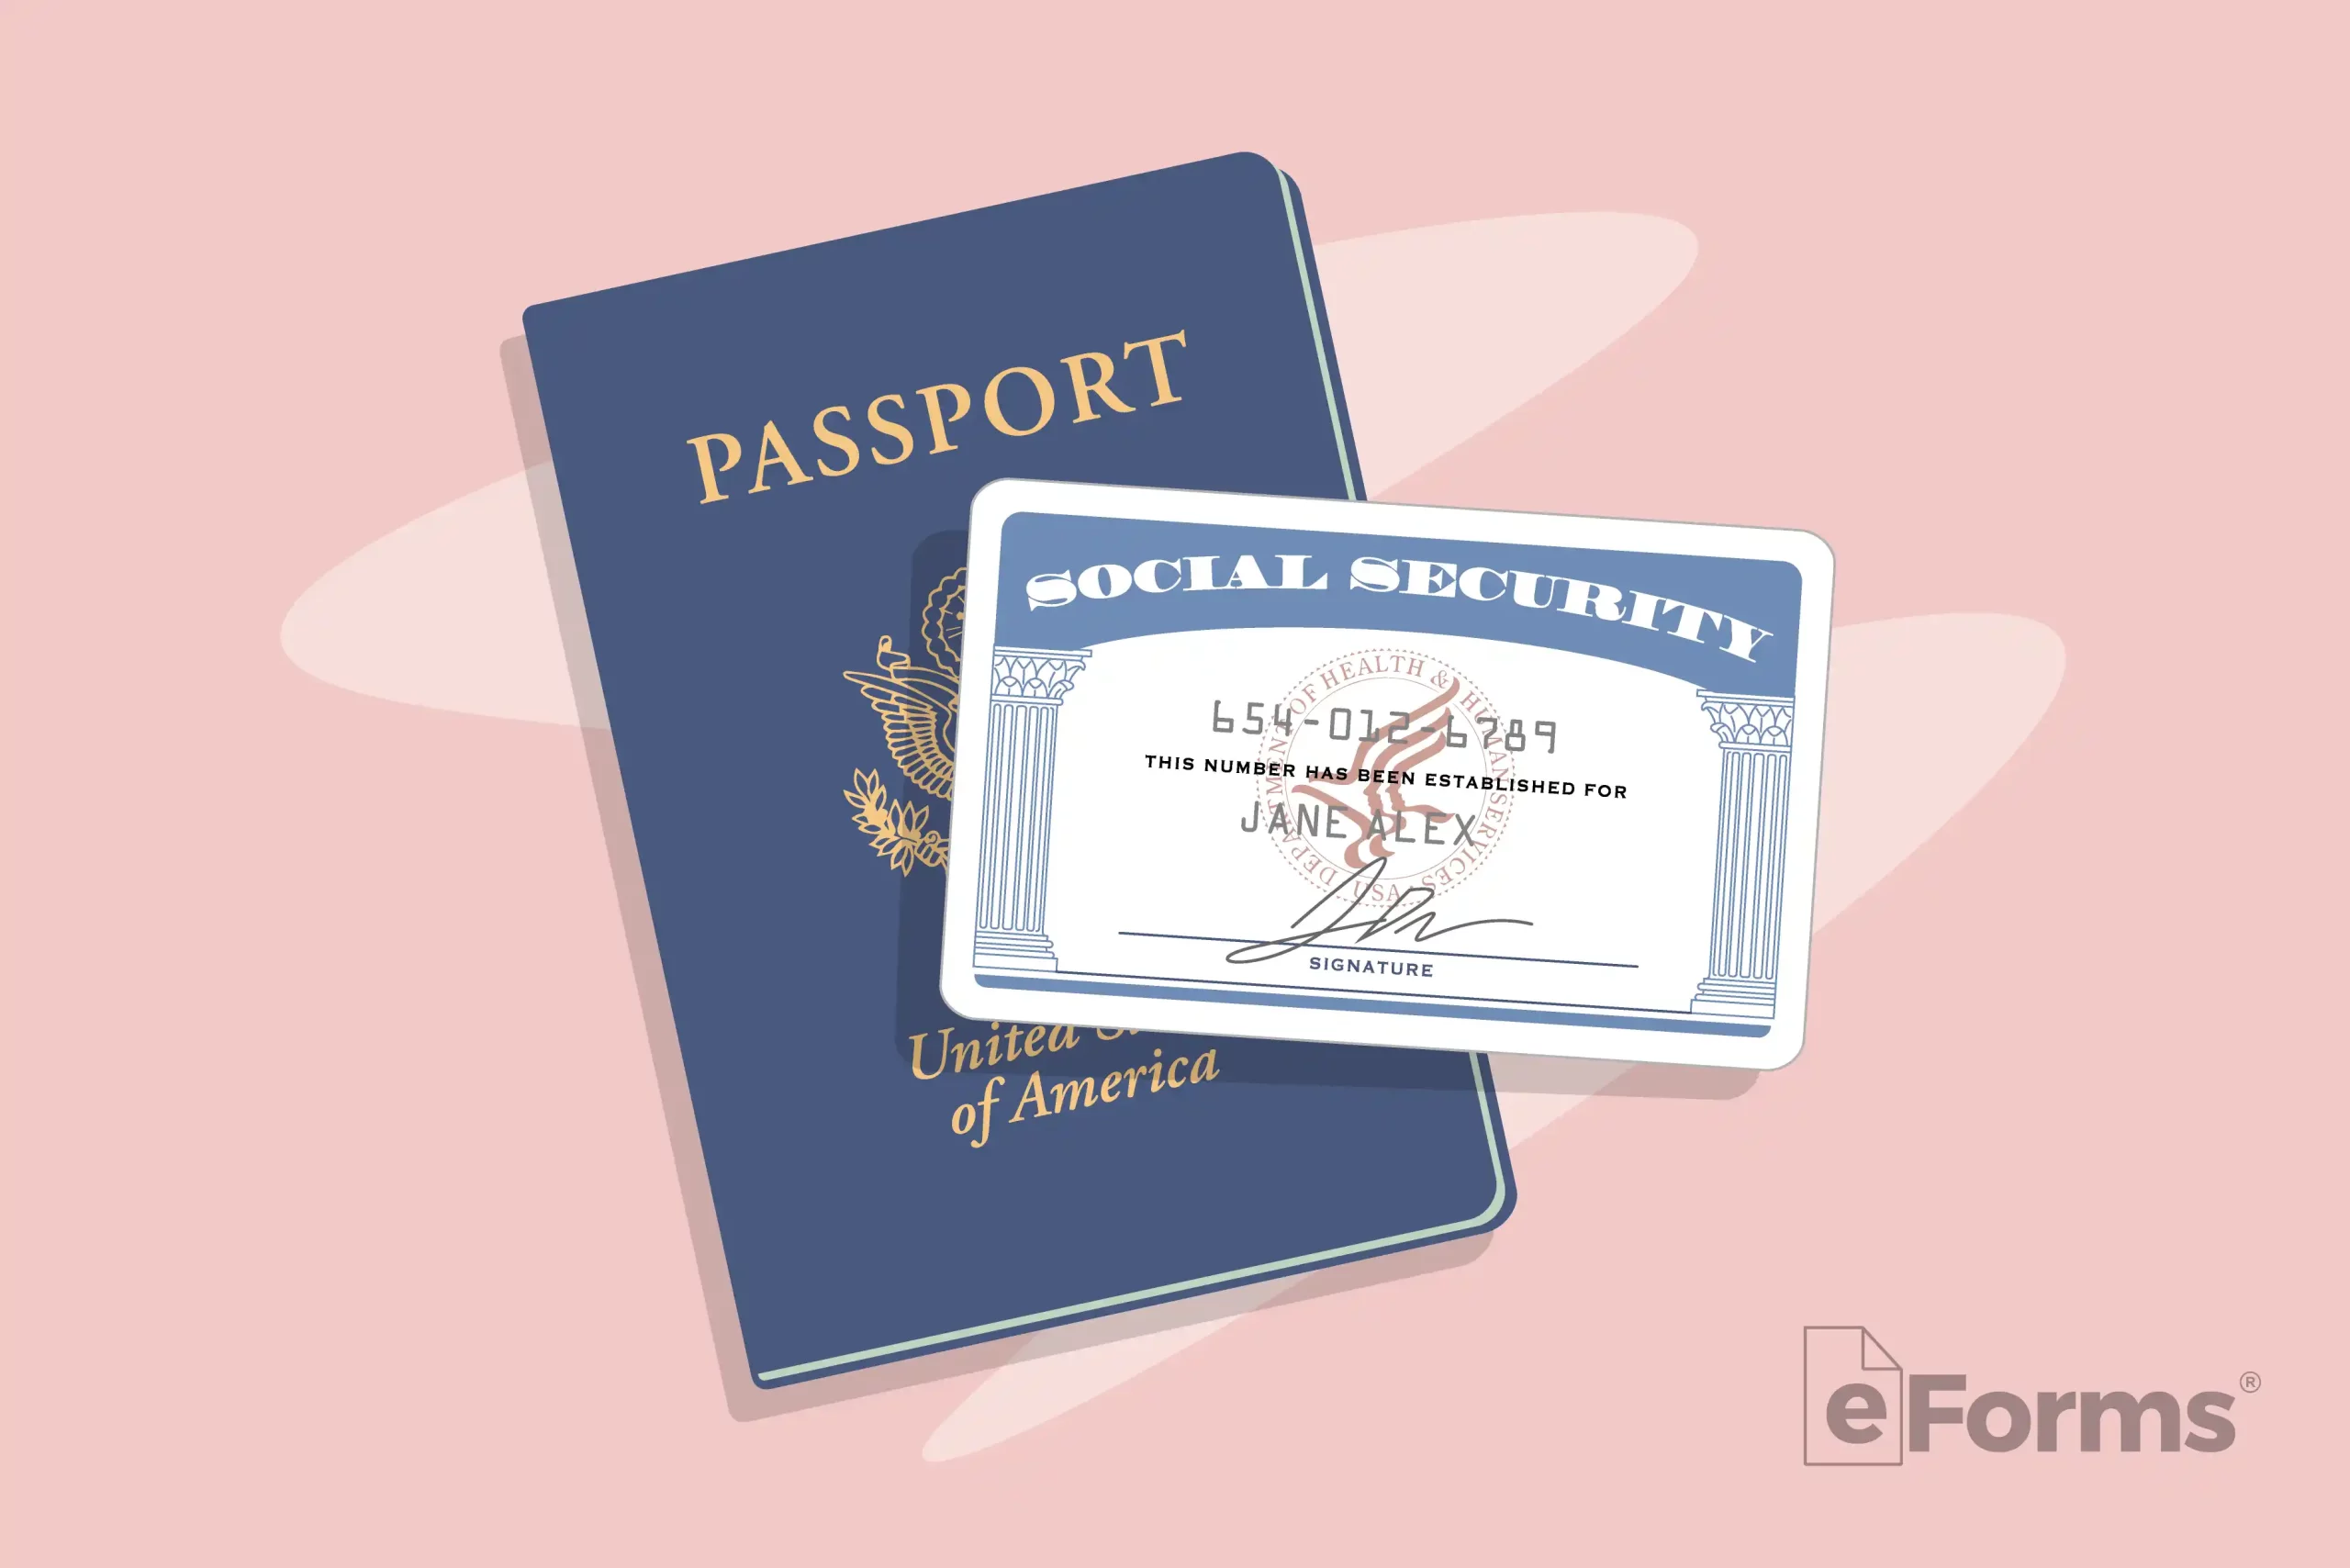 Image showing US Passport and Social Security Card.